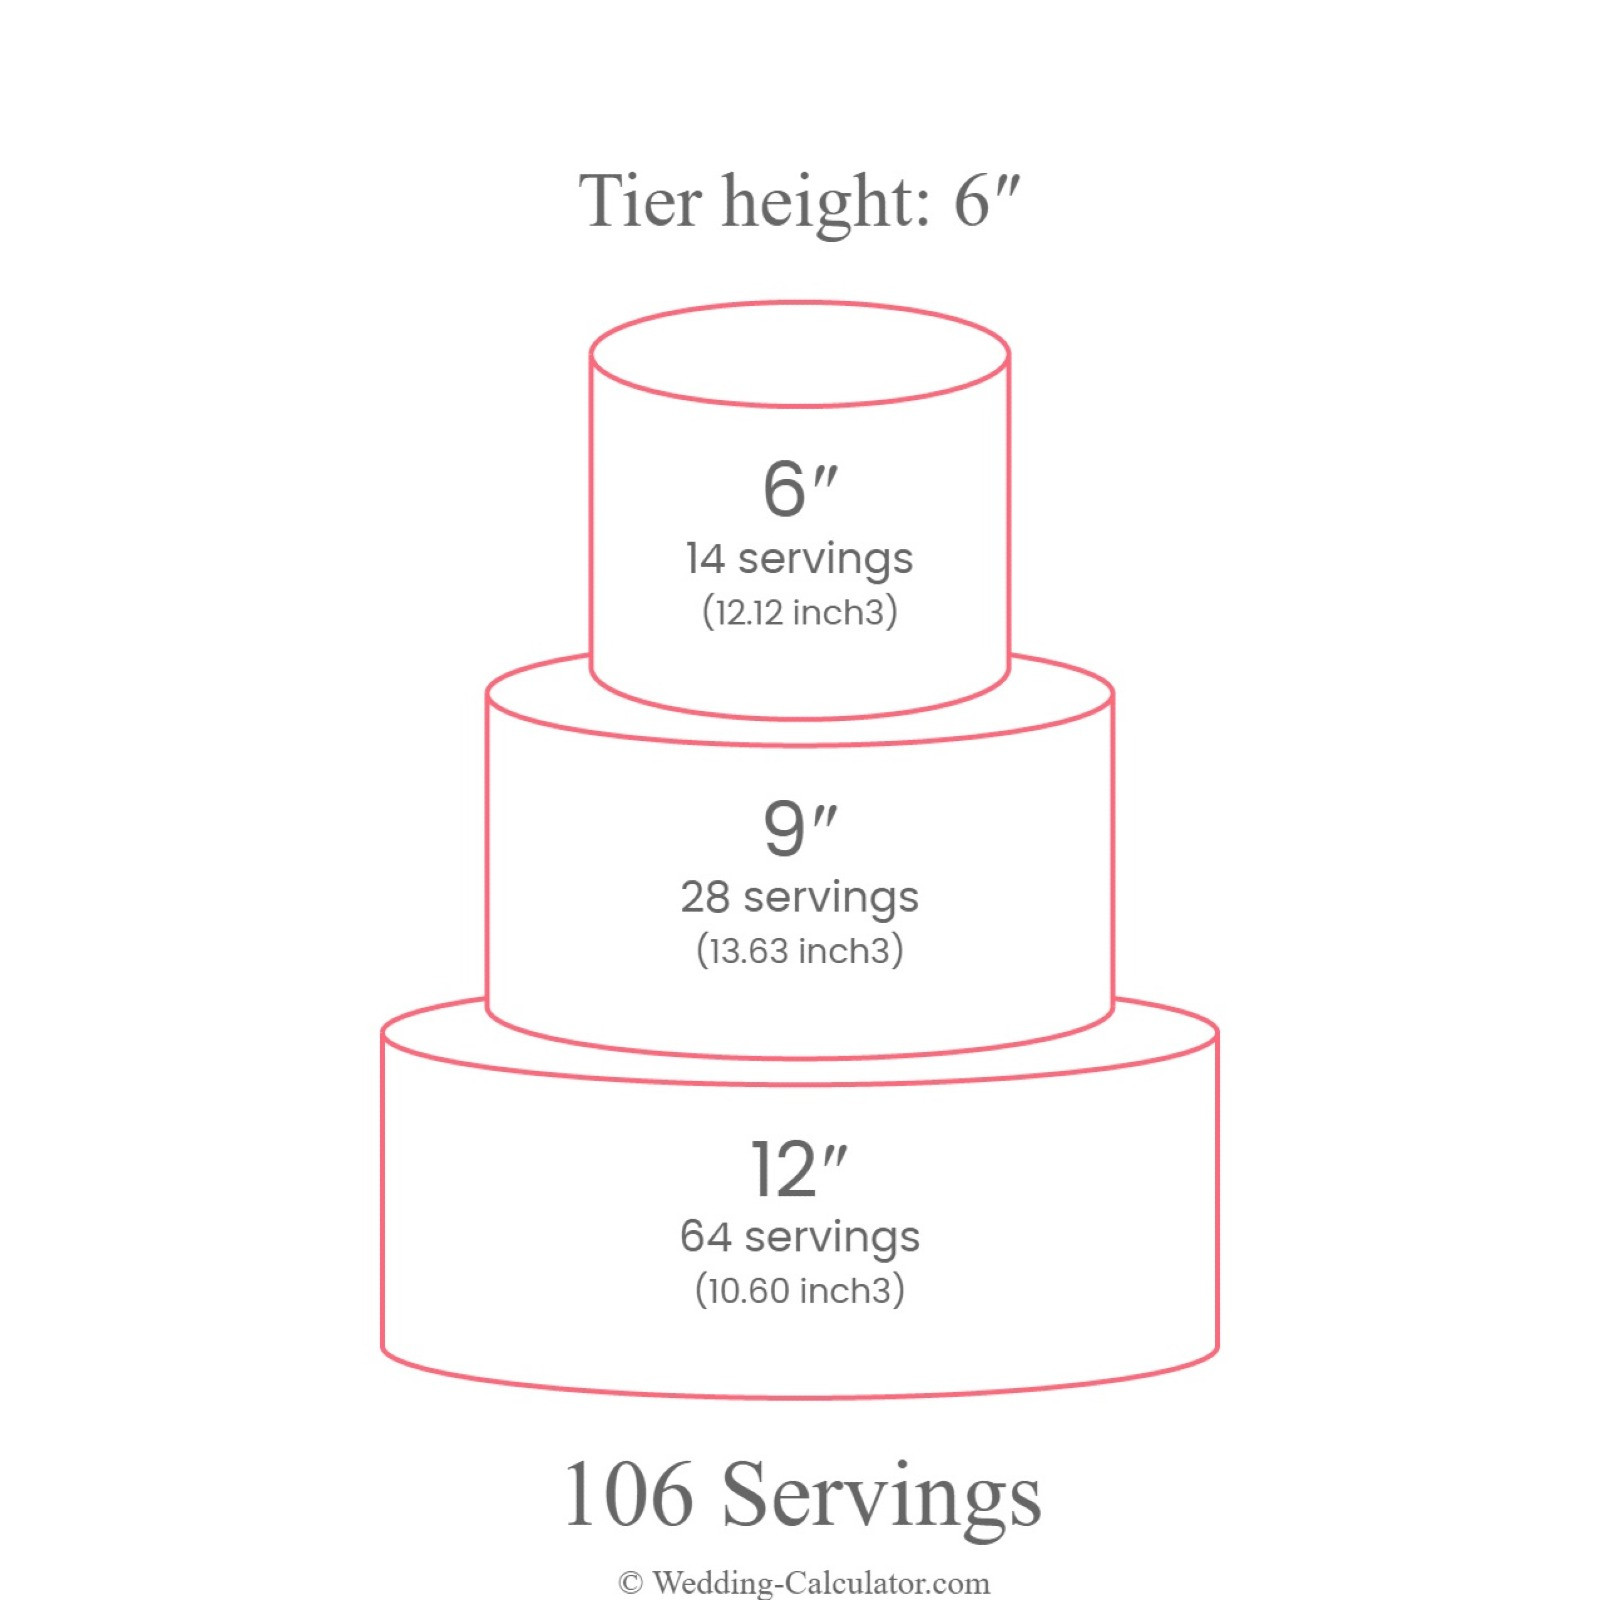 Another wedding cake size for 100 people